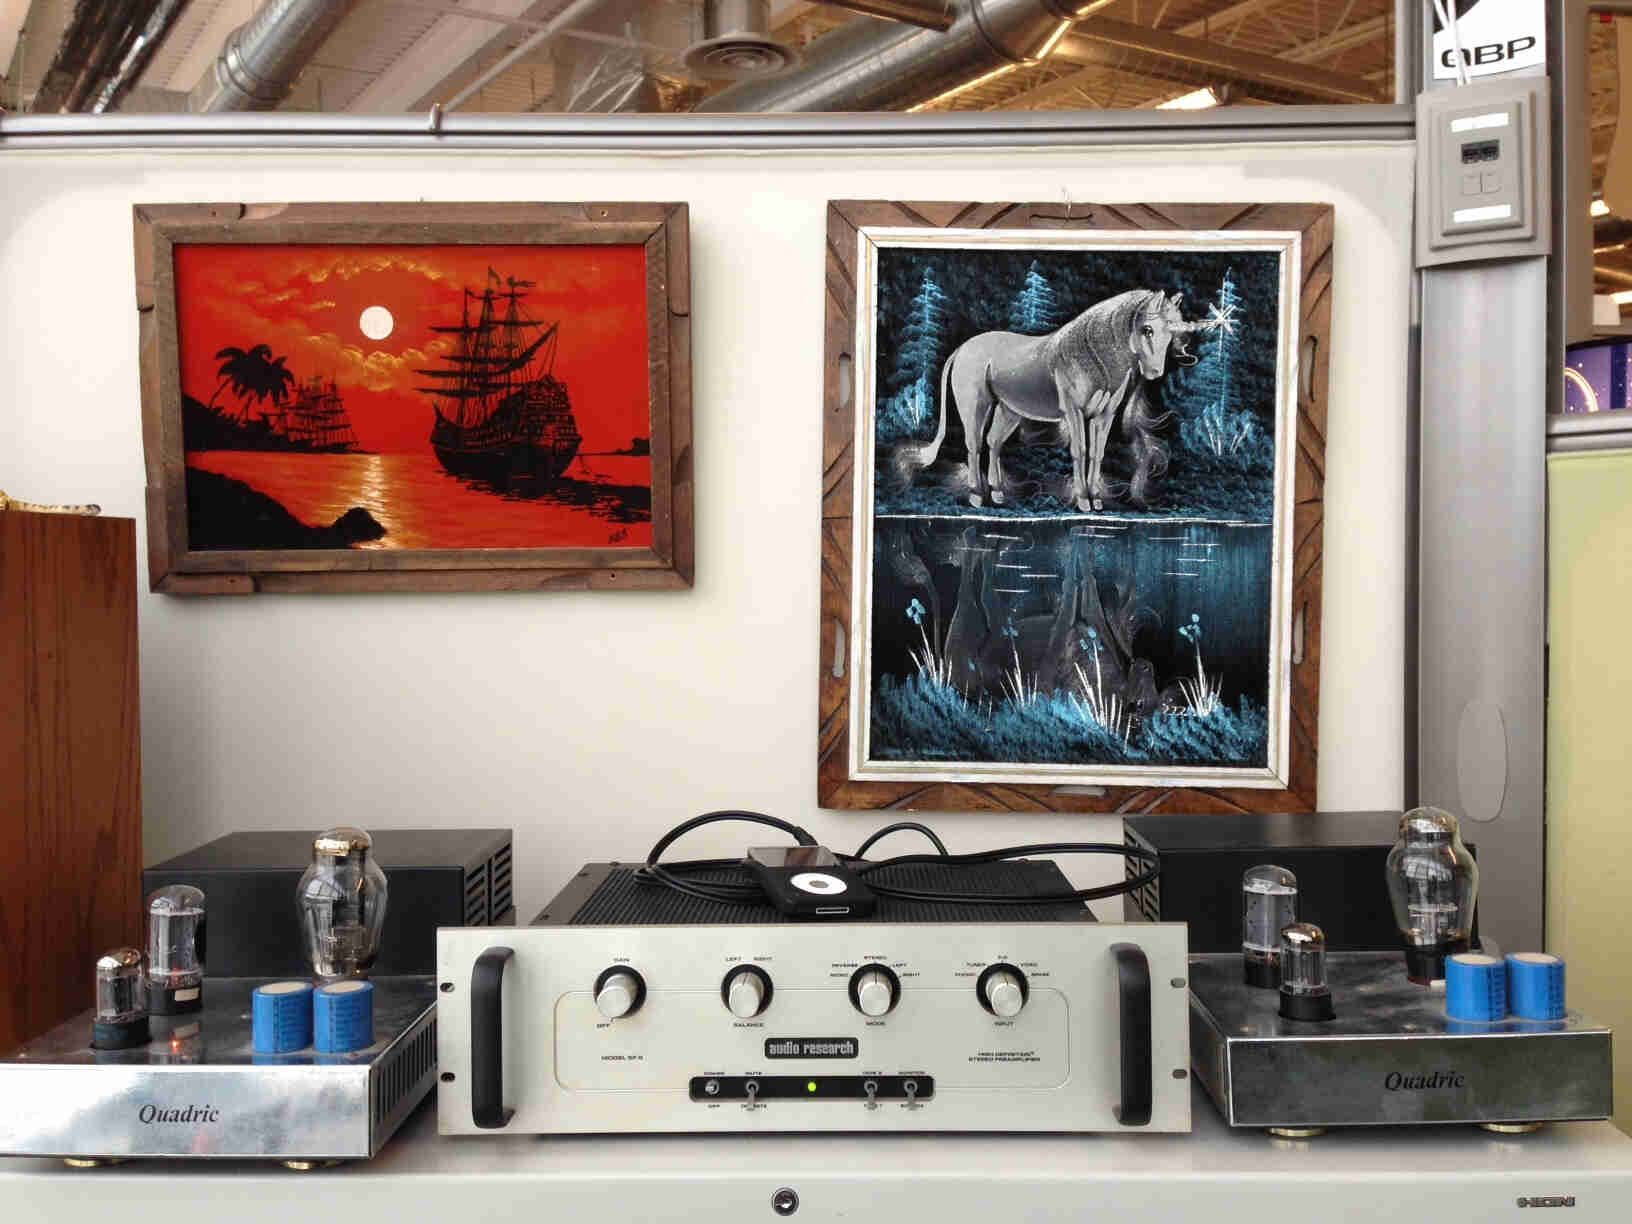 Front view of audio equipment, sitting on a table in an office cubicle, with framed paintings on the wall behind it